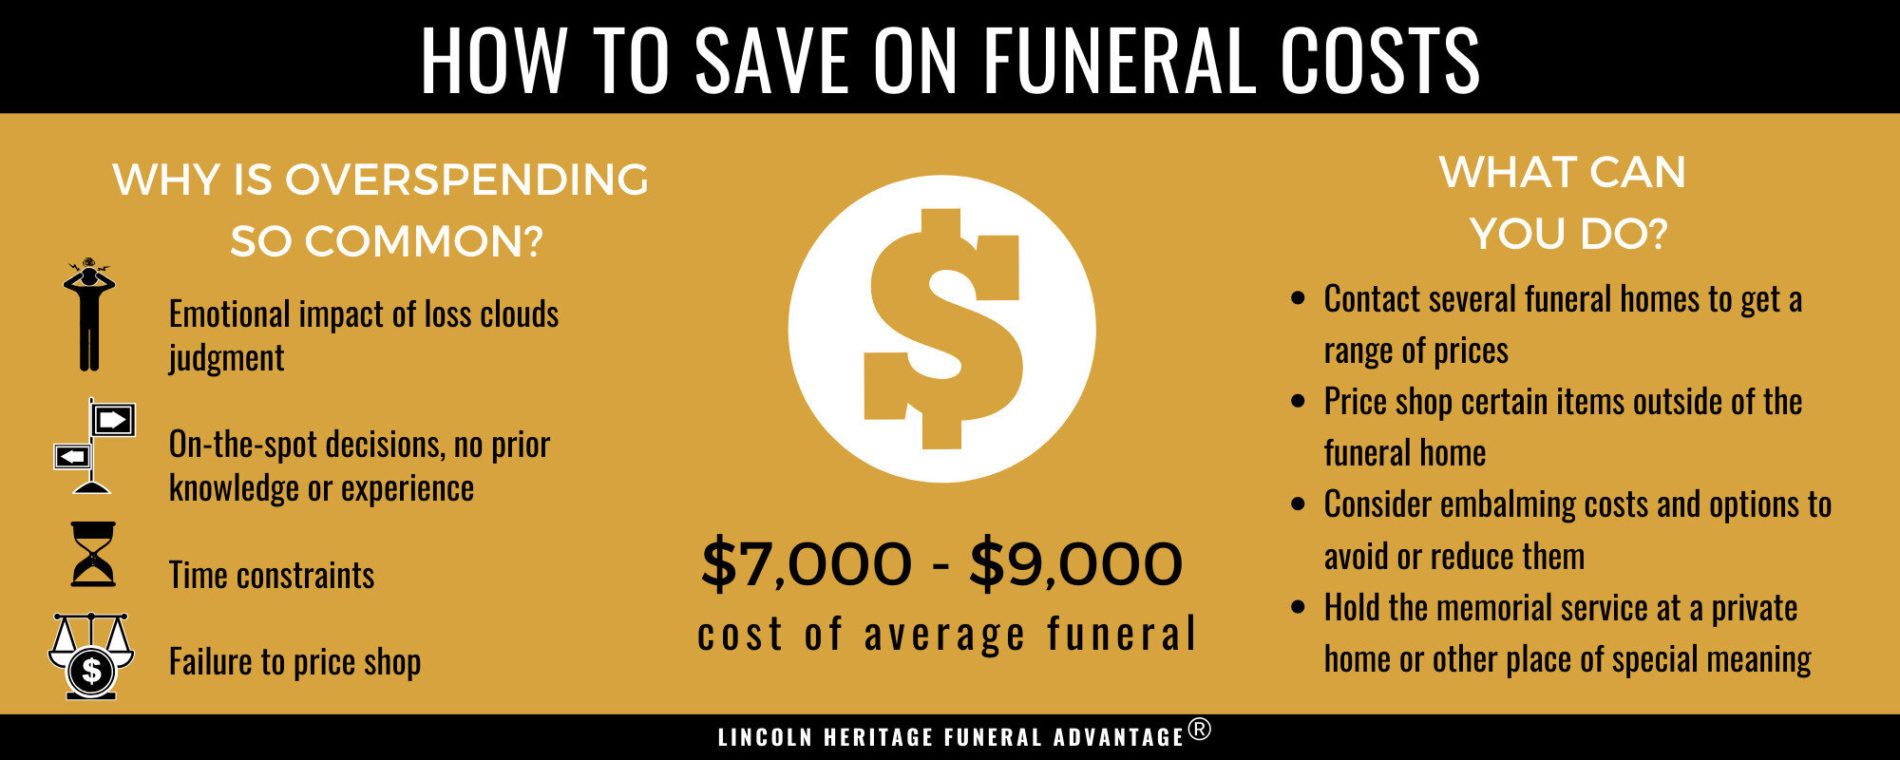 are funeral expenses tax deductible